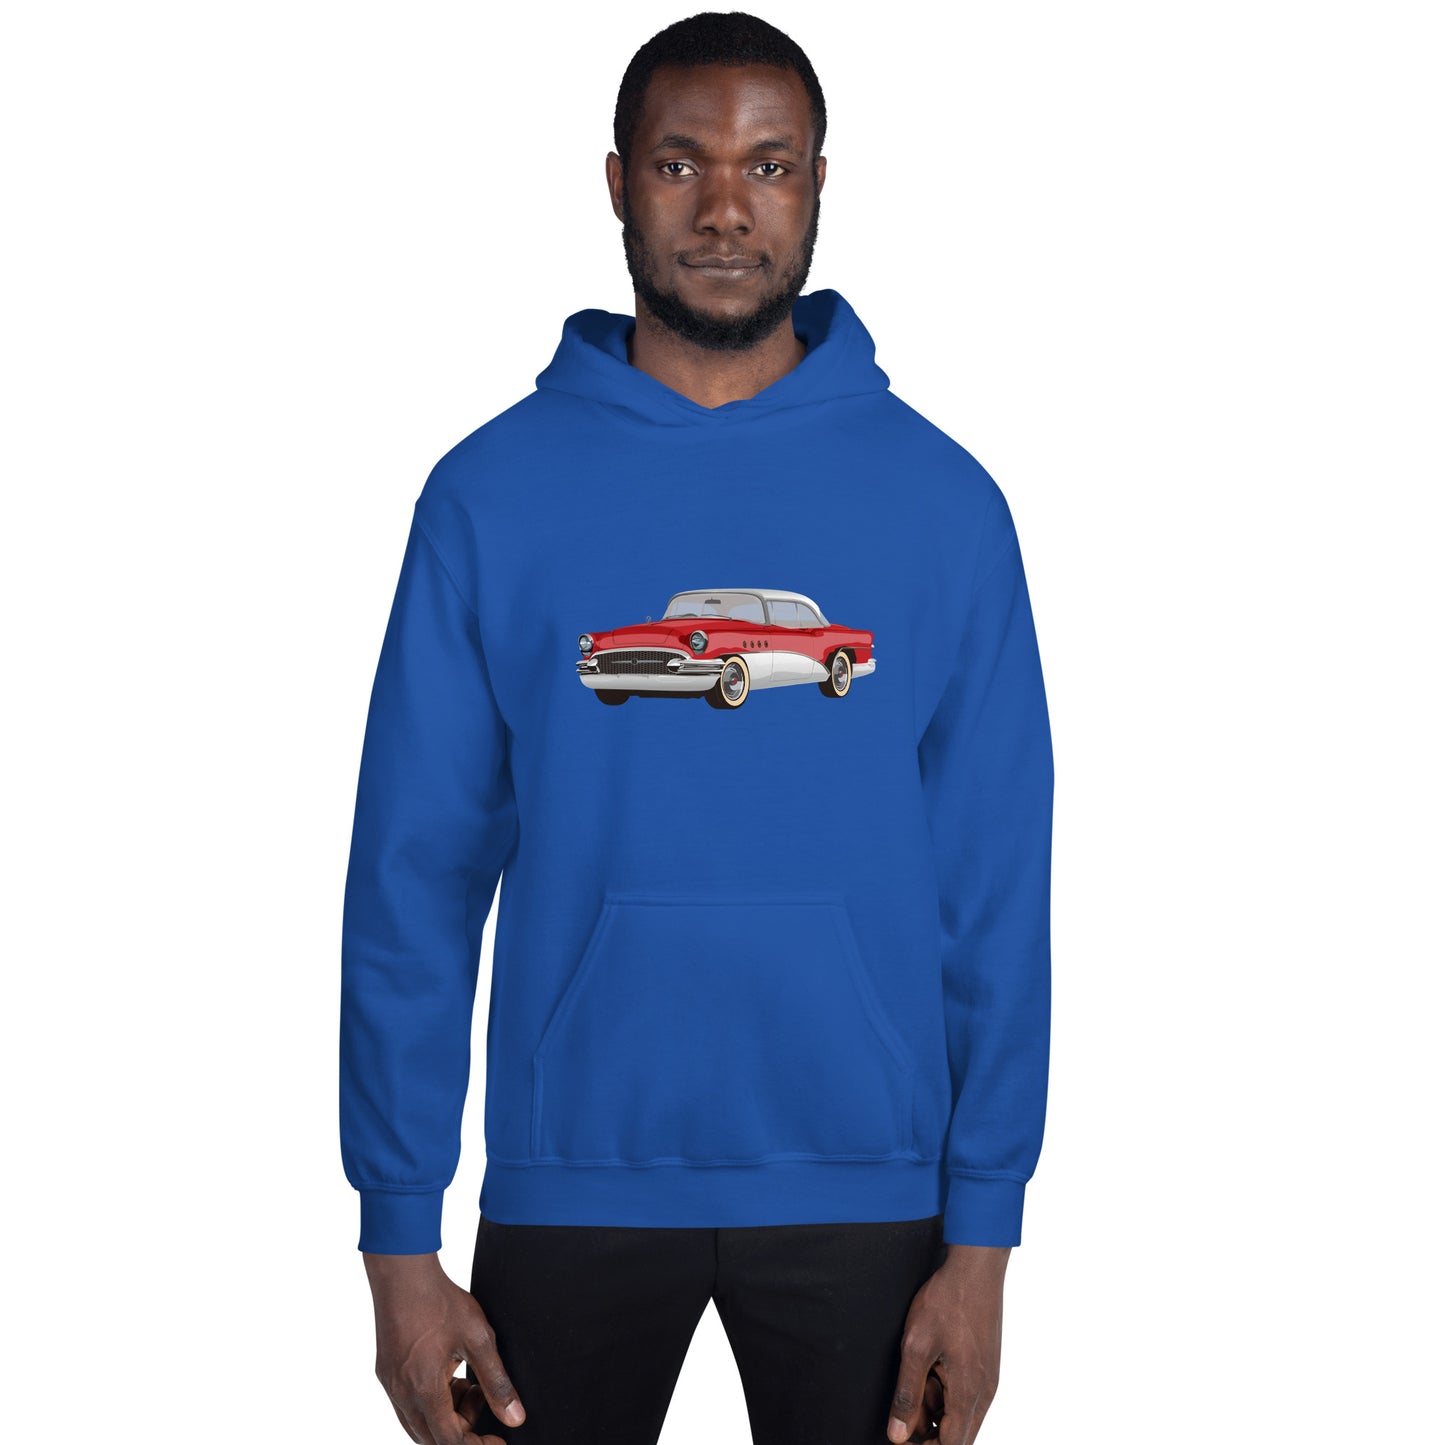 Man with royal blue hoodie with red chevrolet